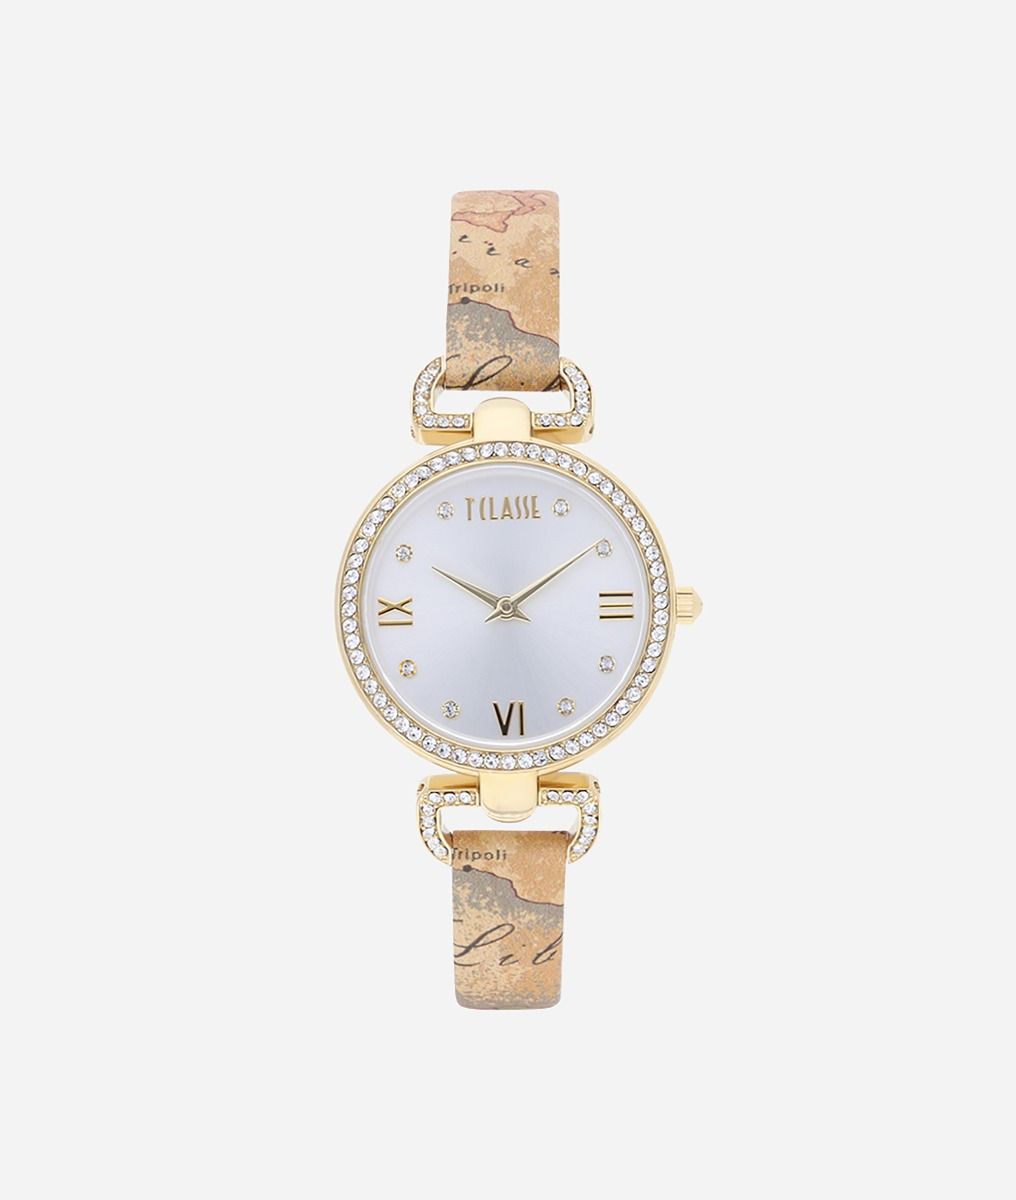 Madagascar whatch with strap in Geo Classic print leather,front